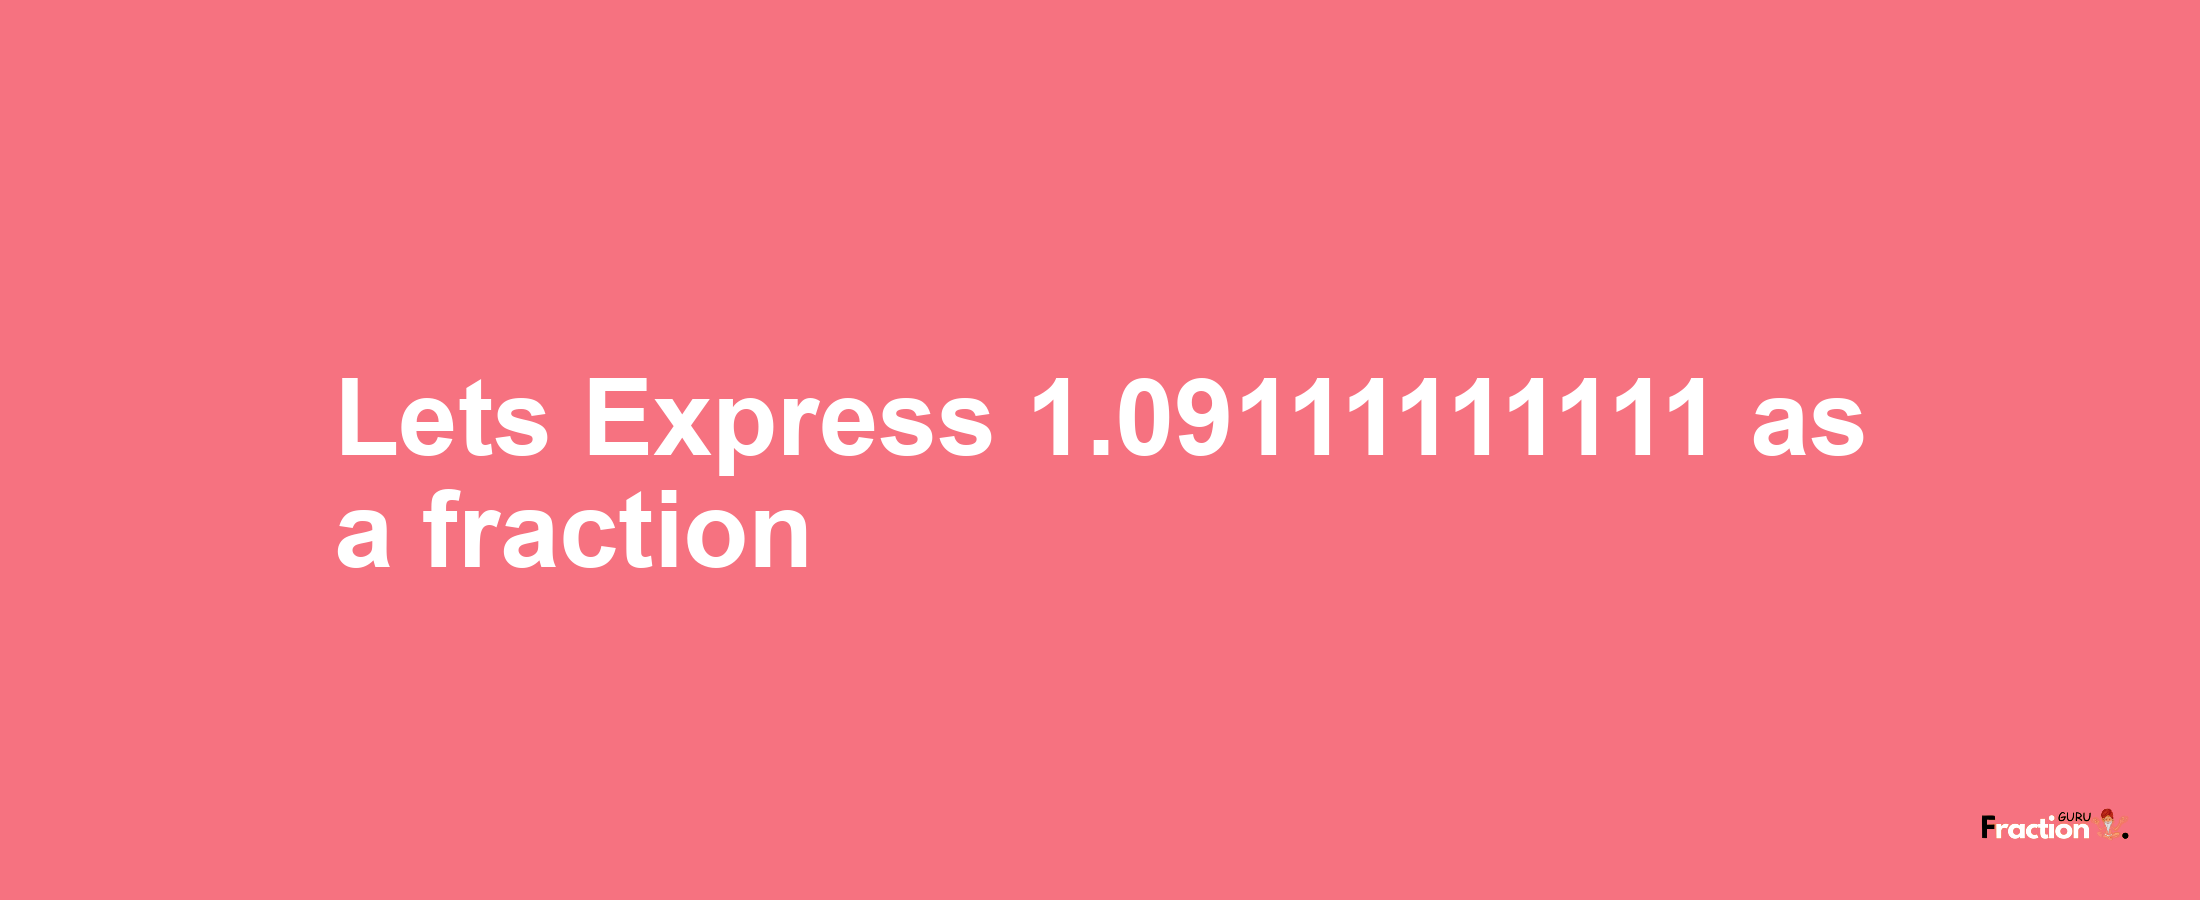 Lets Express 1.09111111111 as afraction